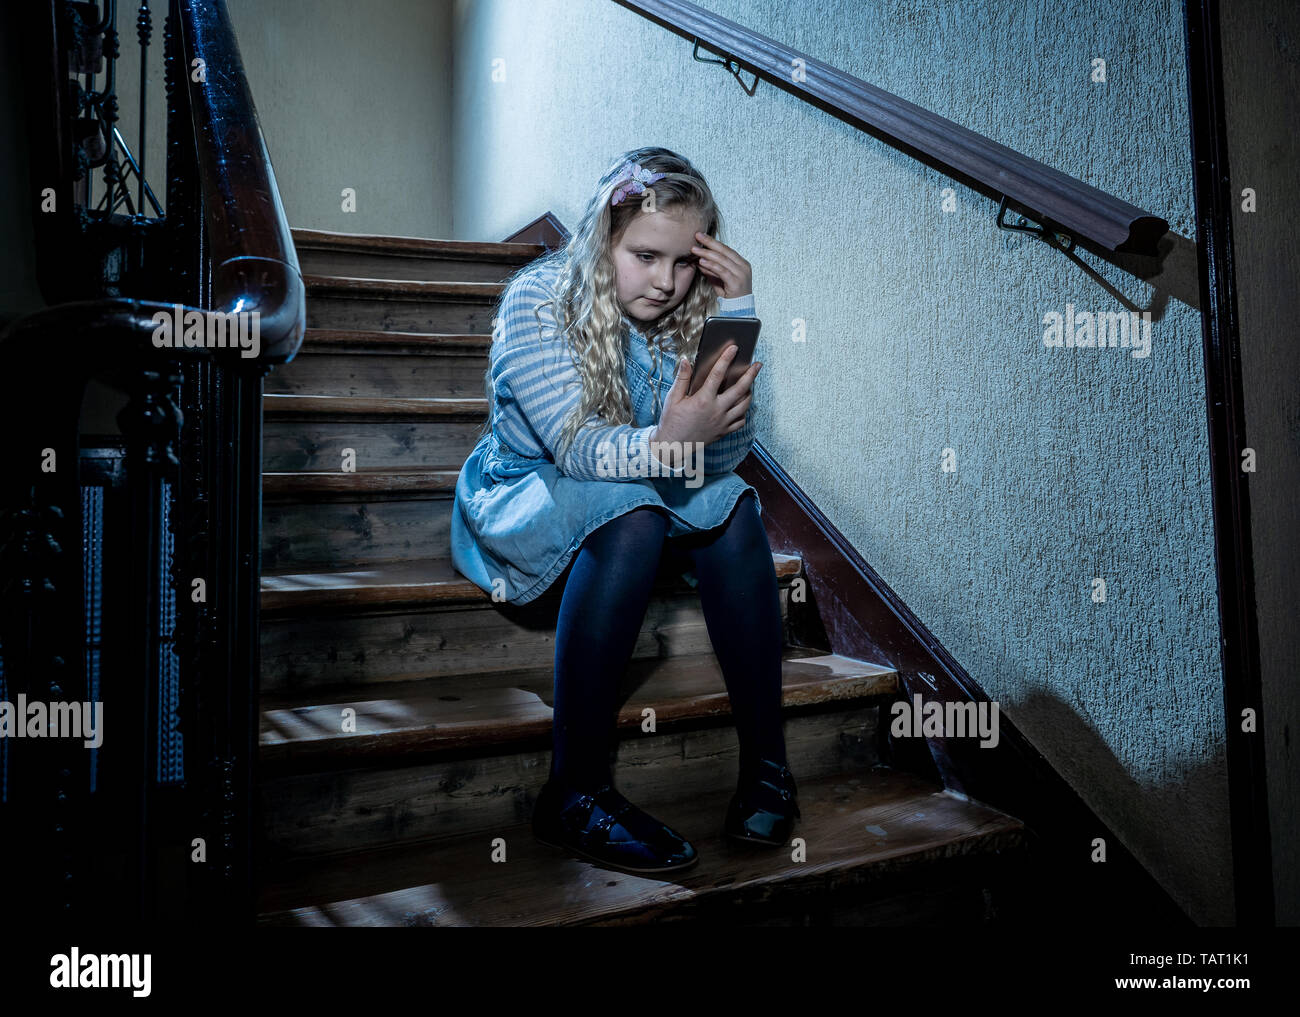 Sad depressed girl Bullied by text message humiliated online social media by classmates. Sad depressed young girl victim of cyberbullying by mobile ph Stock Photo